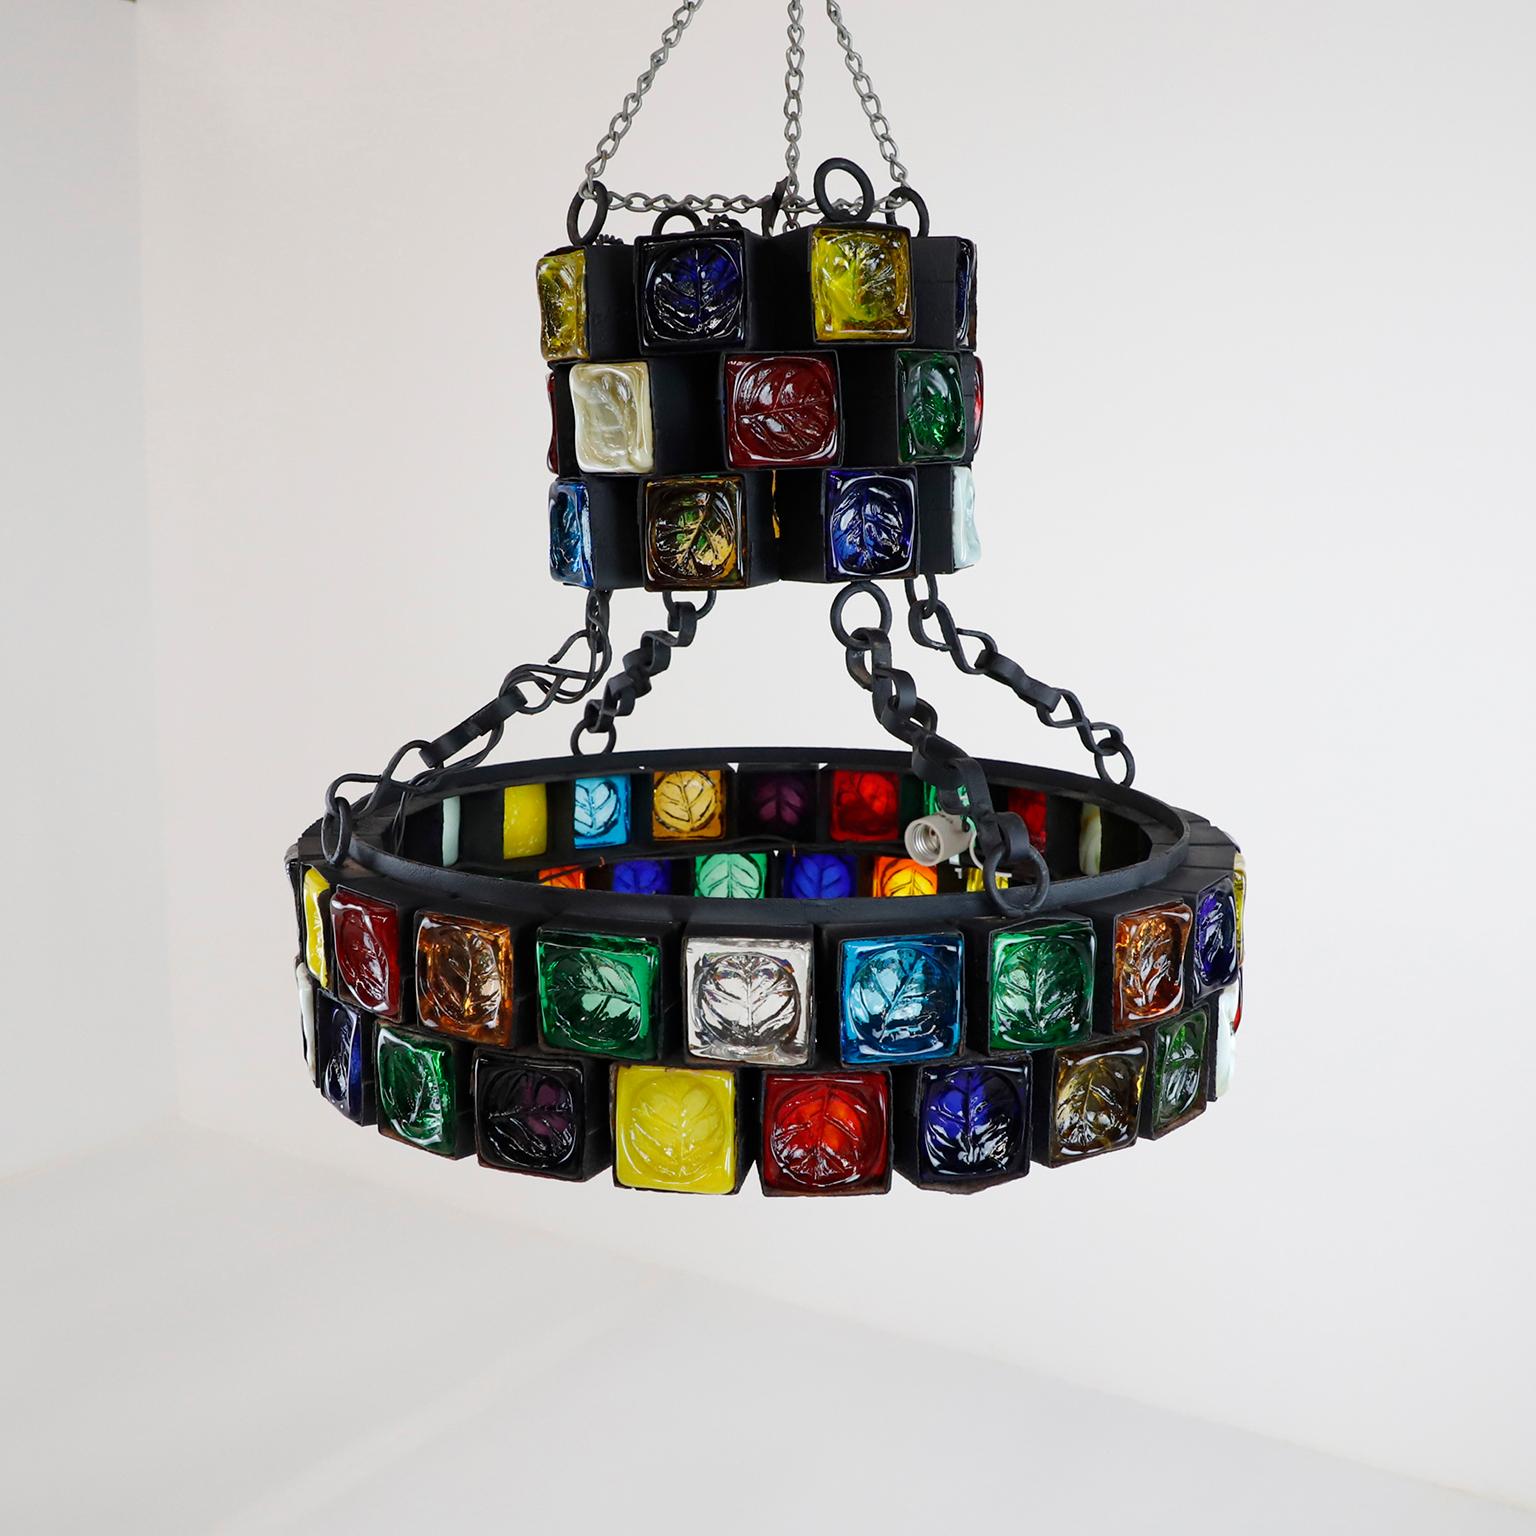 This chandelier is one of the most stunning samples of Brutalist art, made of steel and multicolored blown glass, each cube is handwrought in steel which cradles the thick sculptured glass, the big chandelier have 48 cubes of glass measures 6 x 6 cm